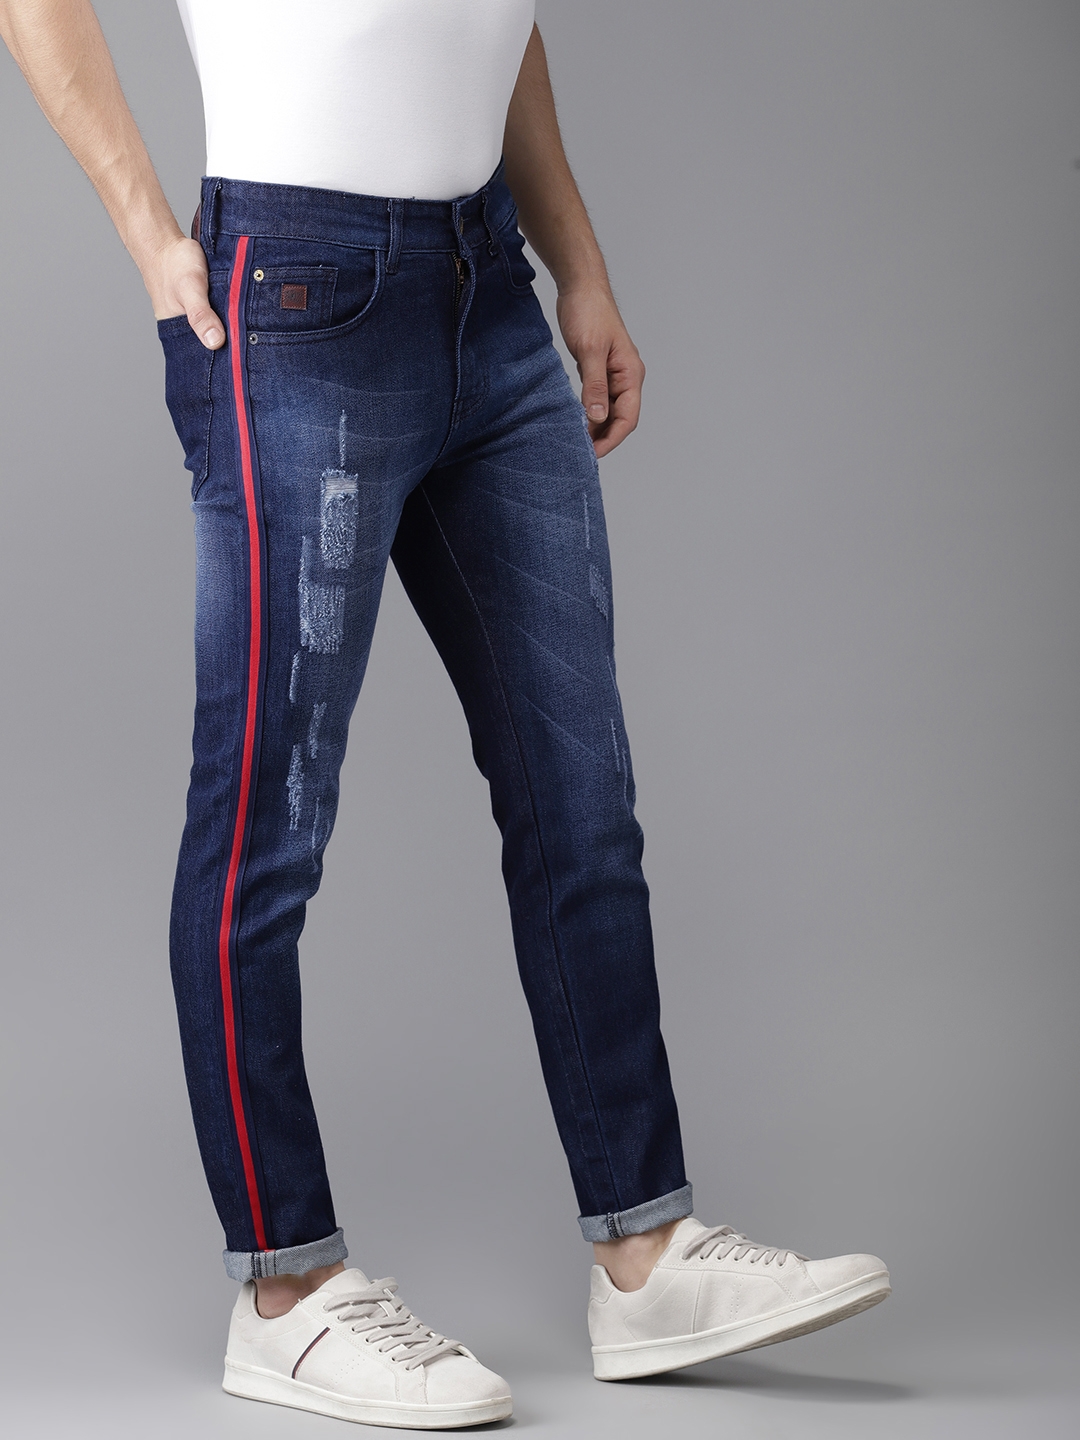 blue denim jeans with red stripe